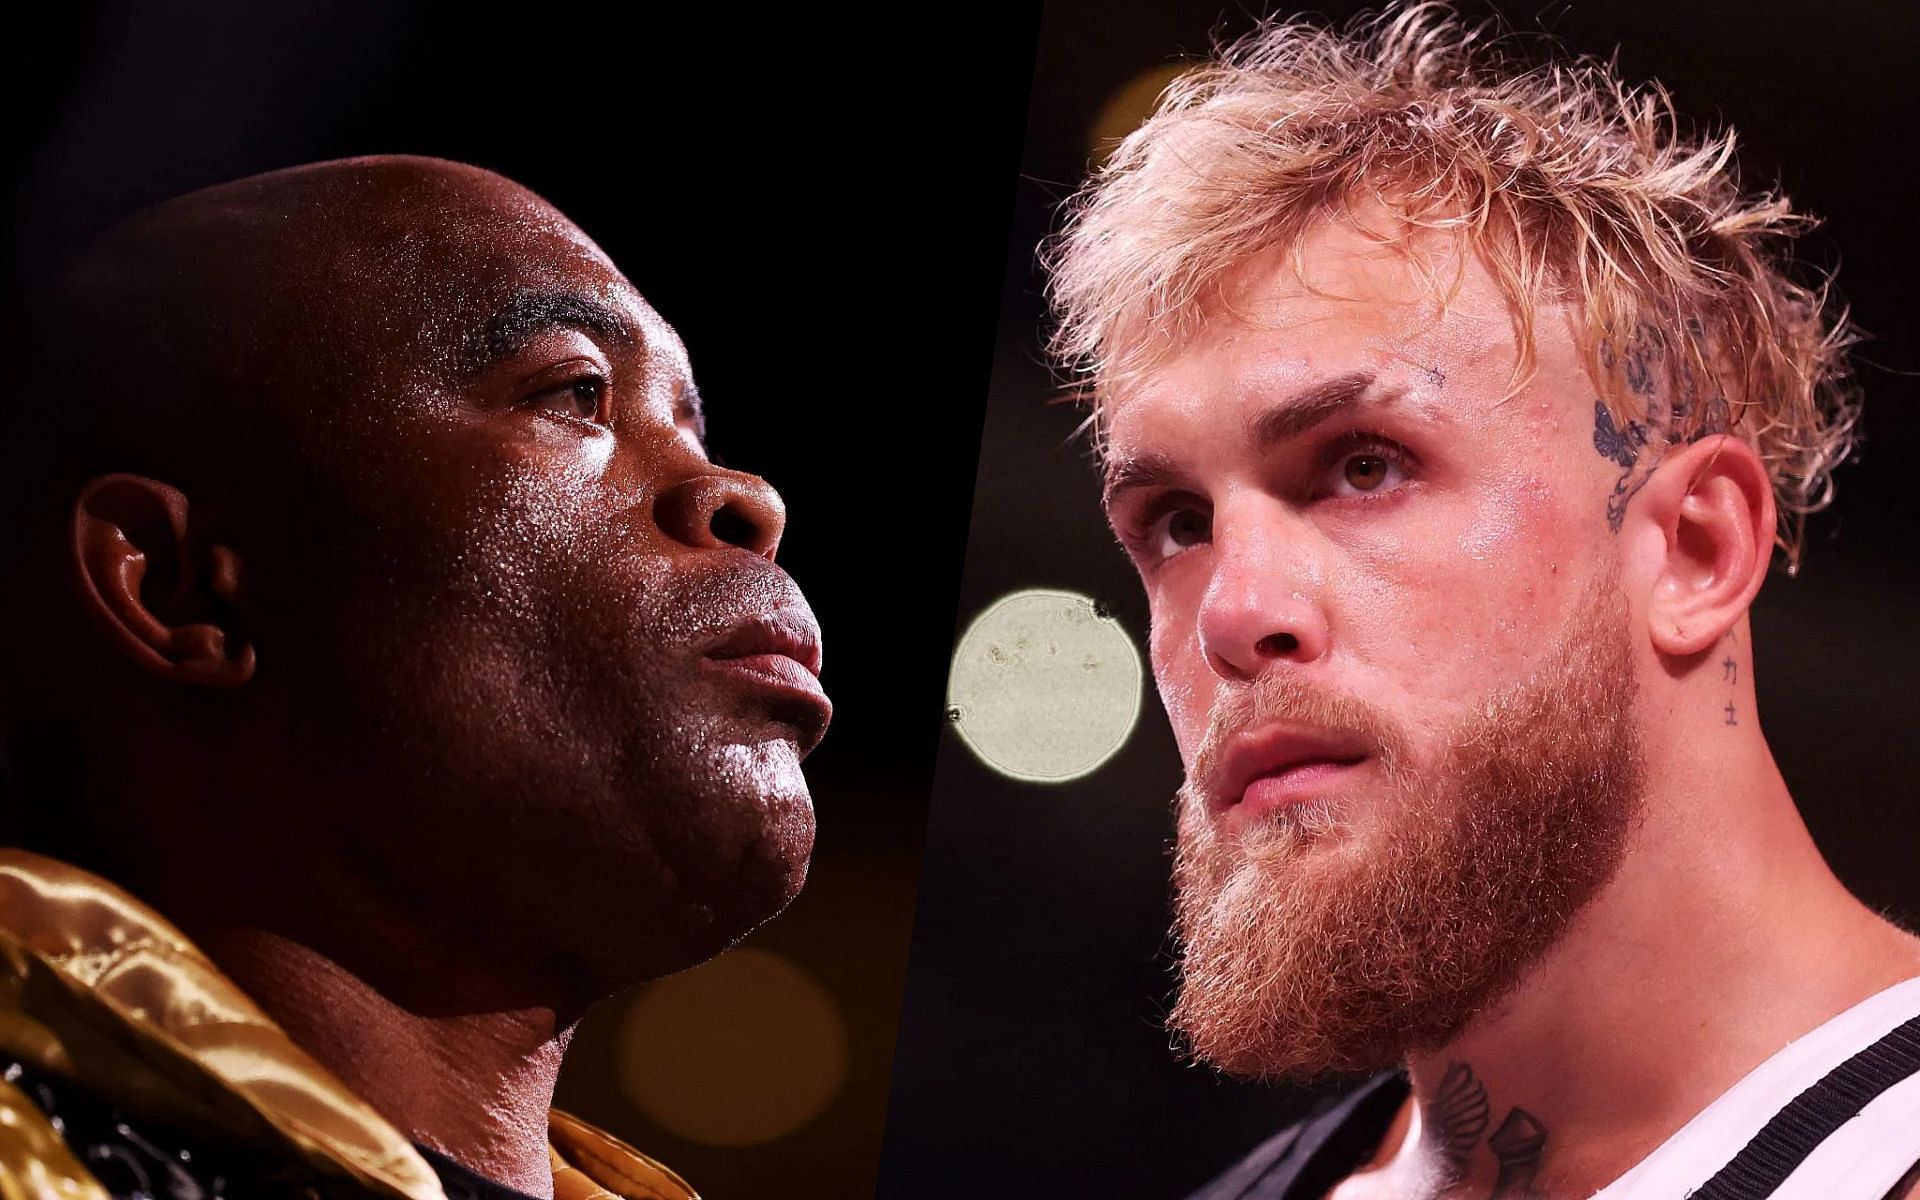 Anderson Silva (left) and Jake Paul (right)